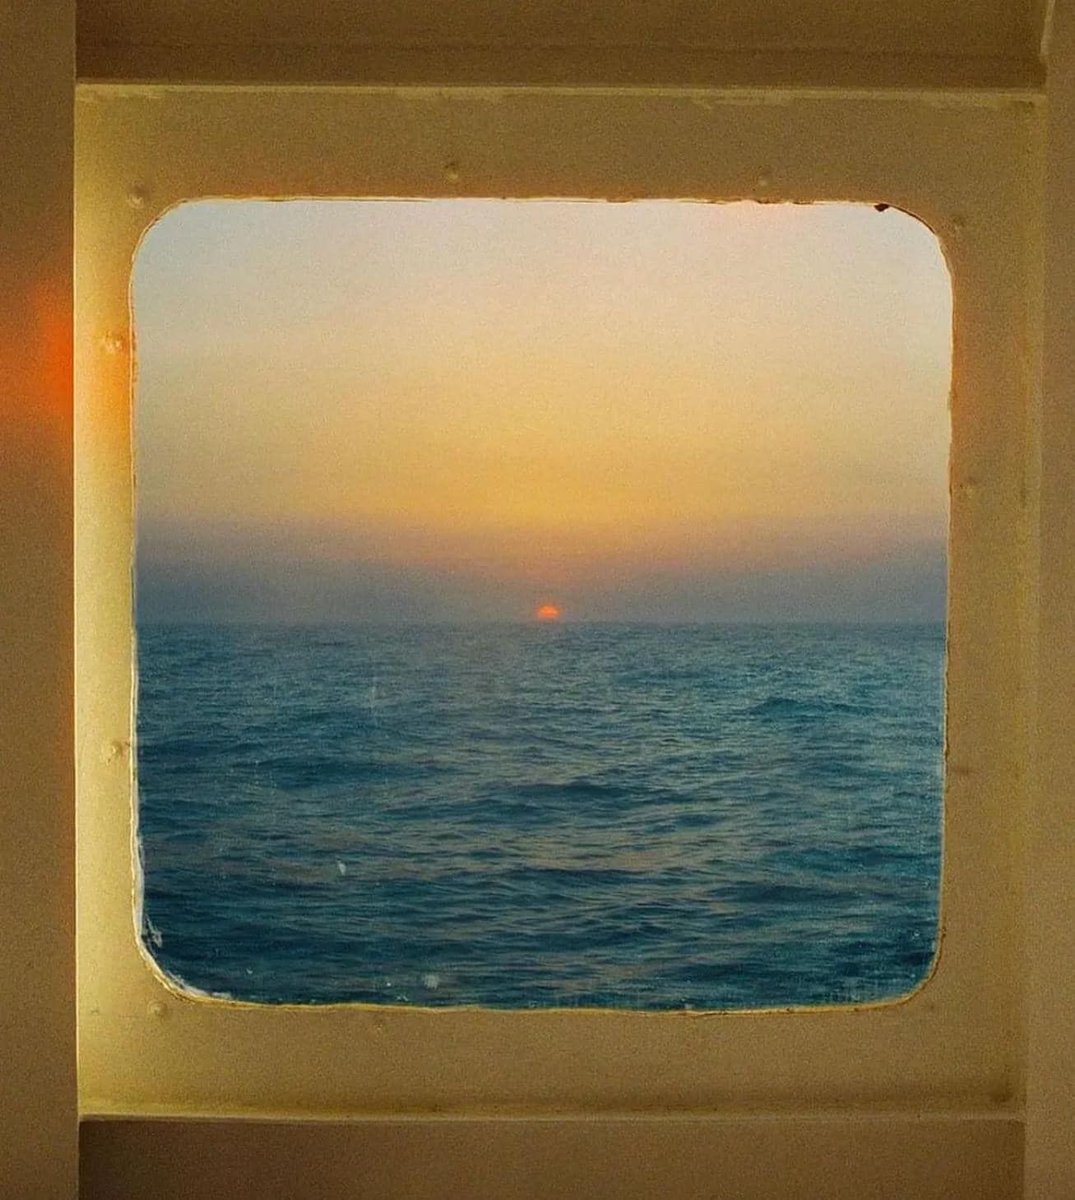 Fabulous Sunset from Boat 🛥️ by Jade Stephens #sunset #sea #art #sea